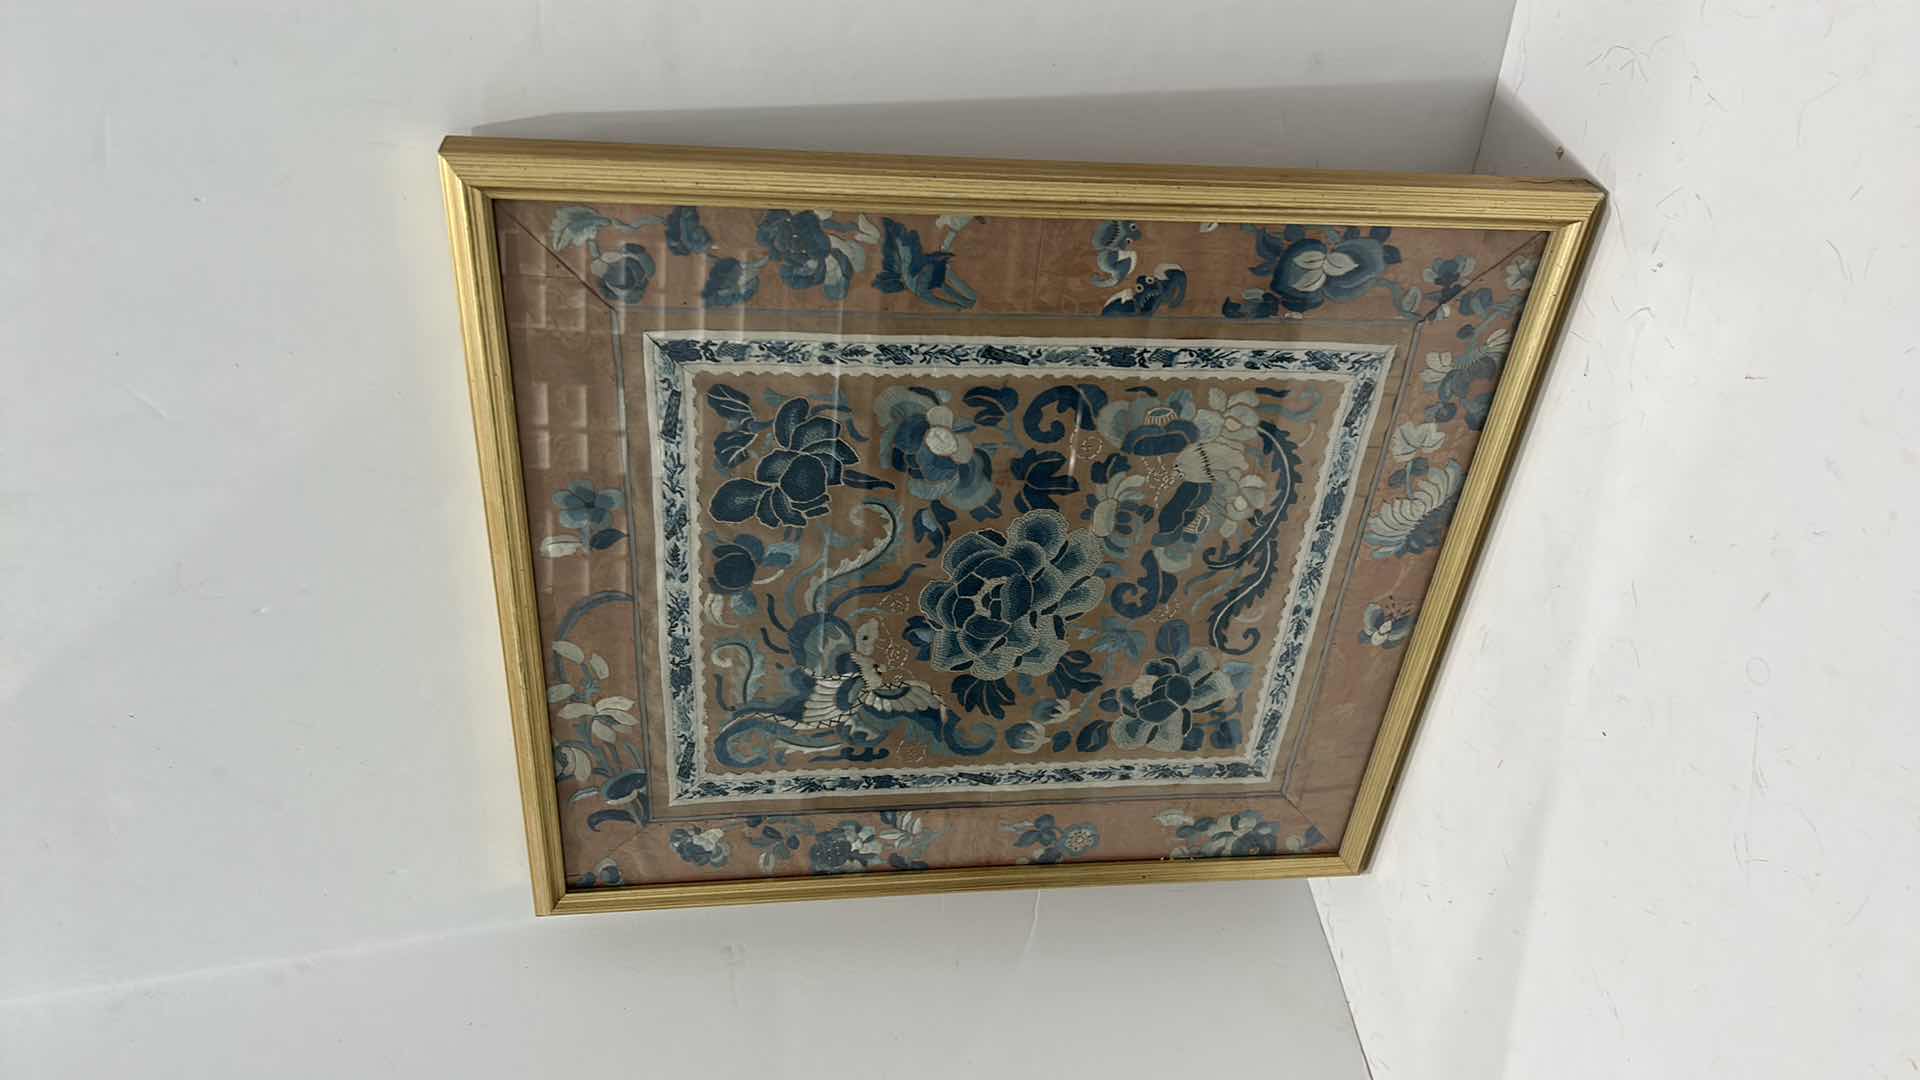 Photo 5 of ANTIQUE CHINESE TEXTILE FABRIC, SILK WITH SILK THREAD HAND EMBROIDERY ARTWORK FRAMED14 1/2” x 17” 16 1/2” x 18 1/2”